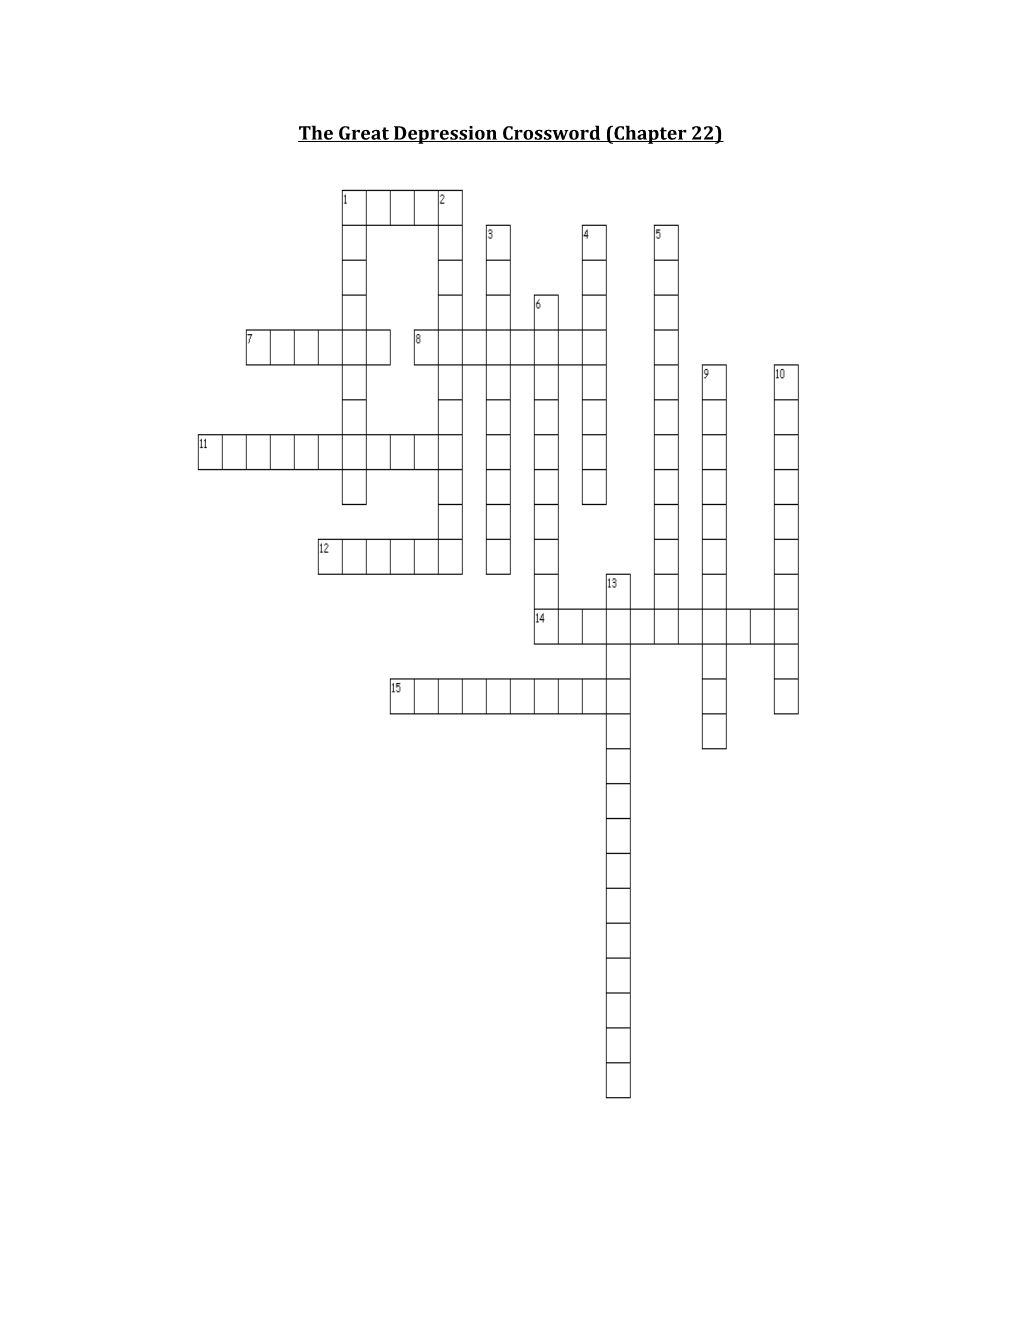 The Great Depression Crossword (Chapter 22)